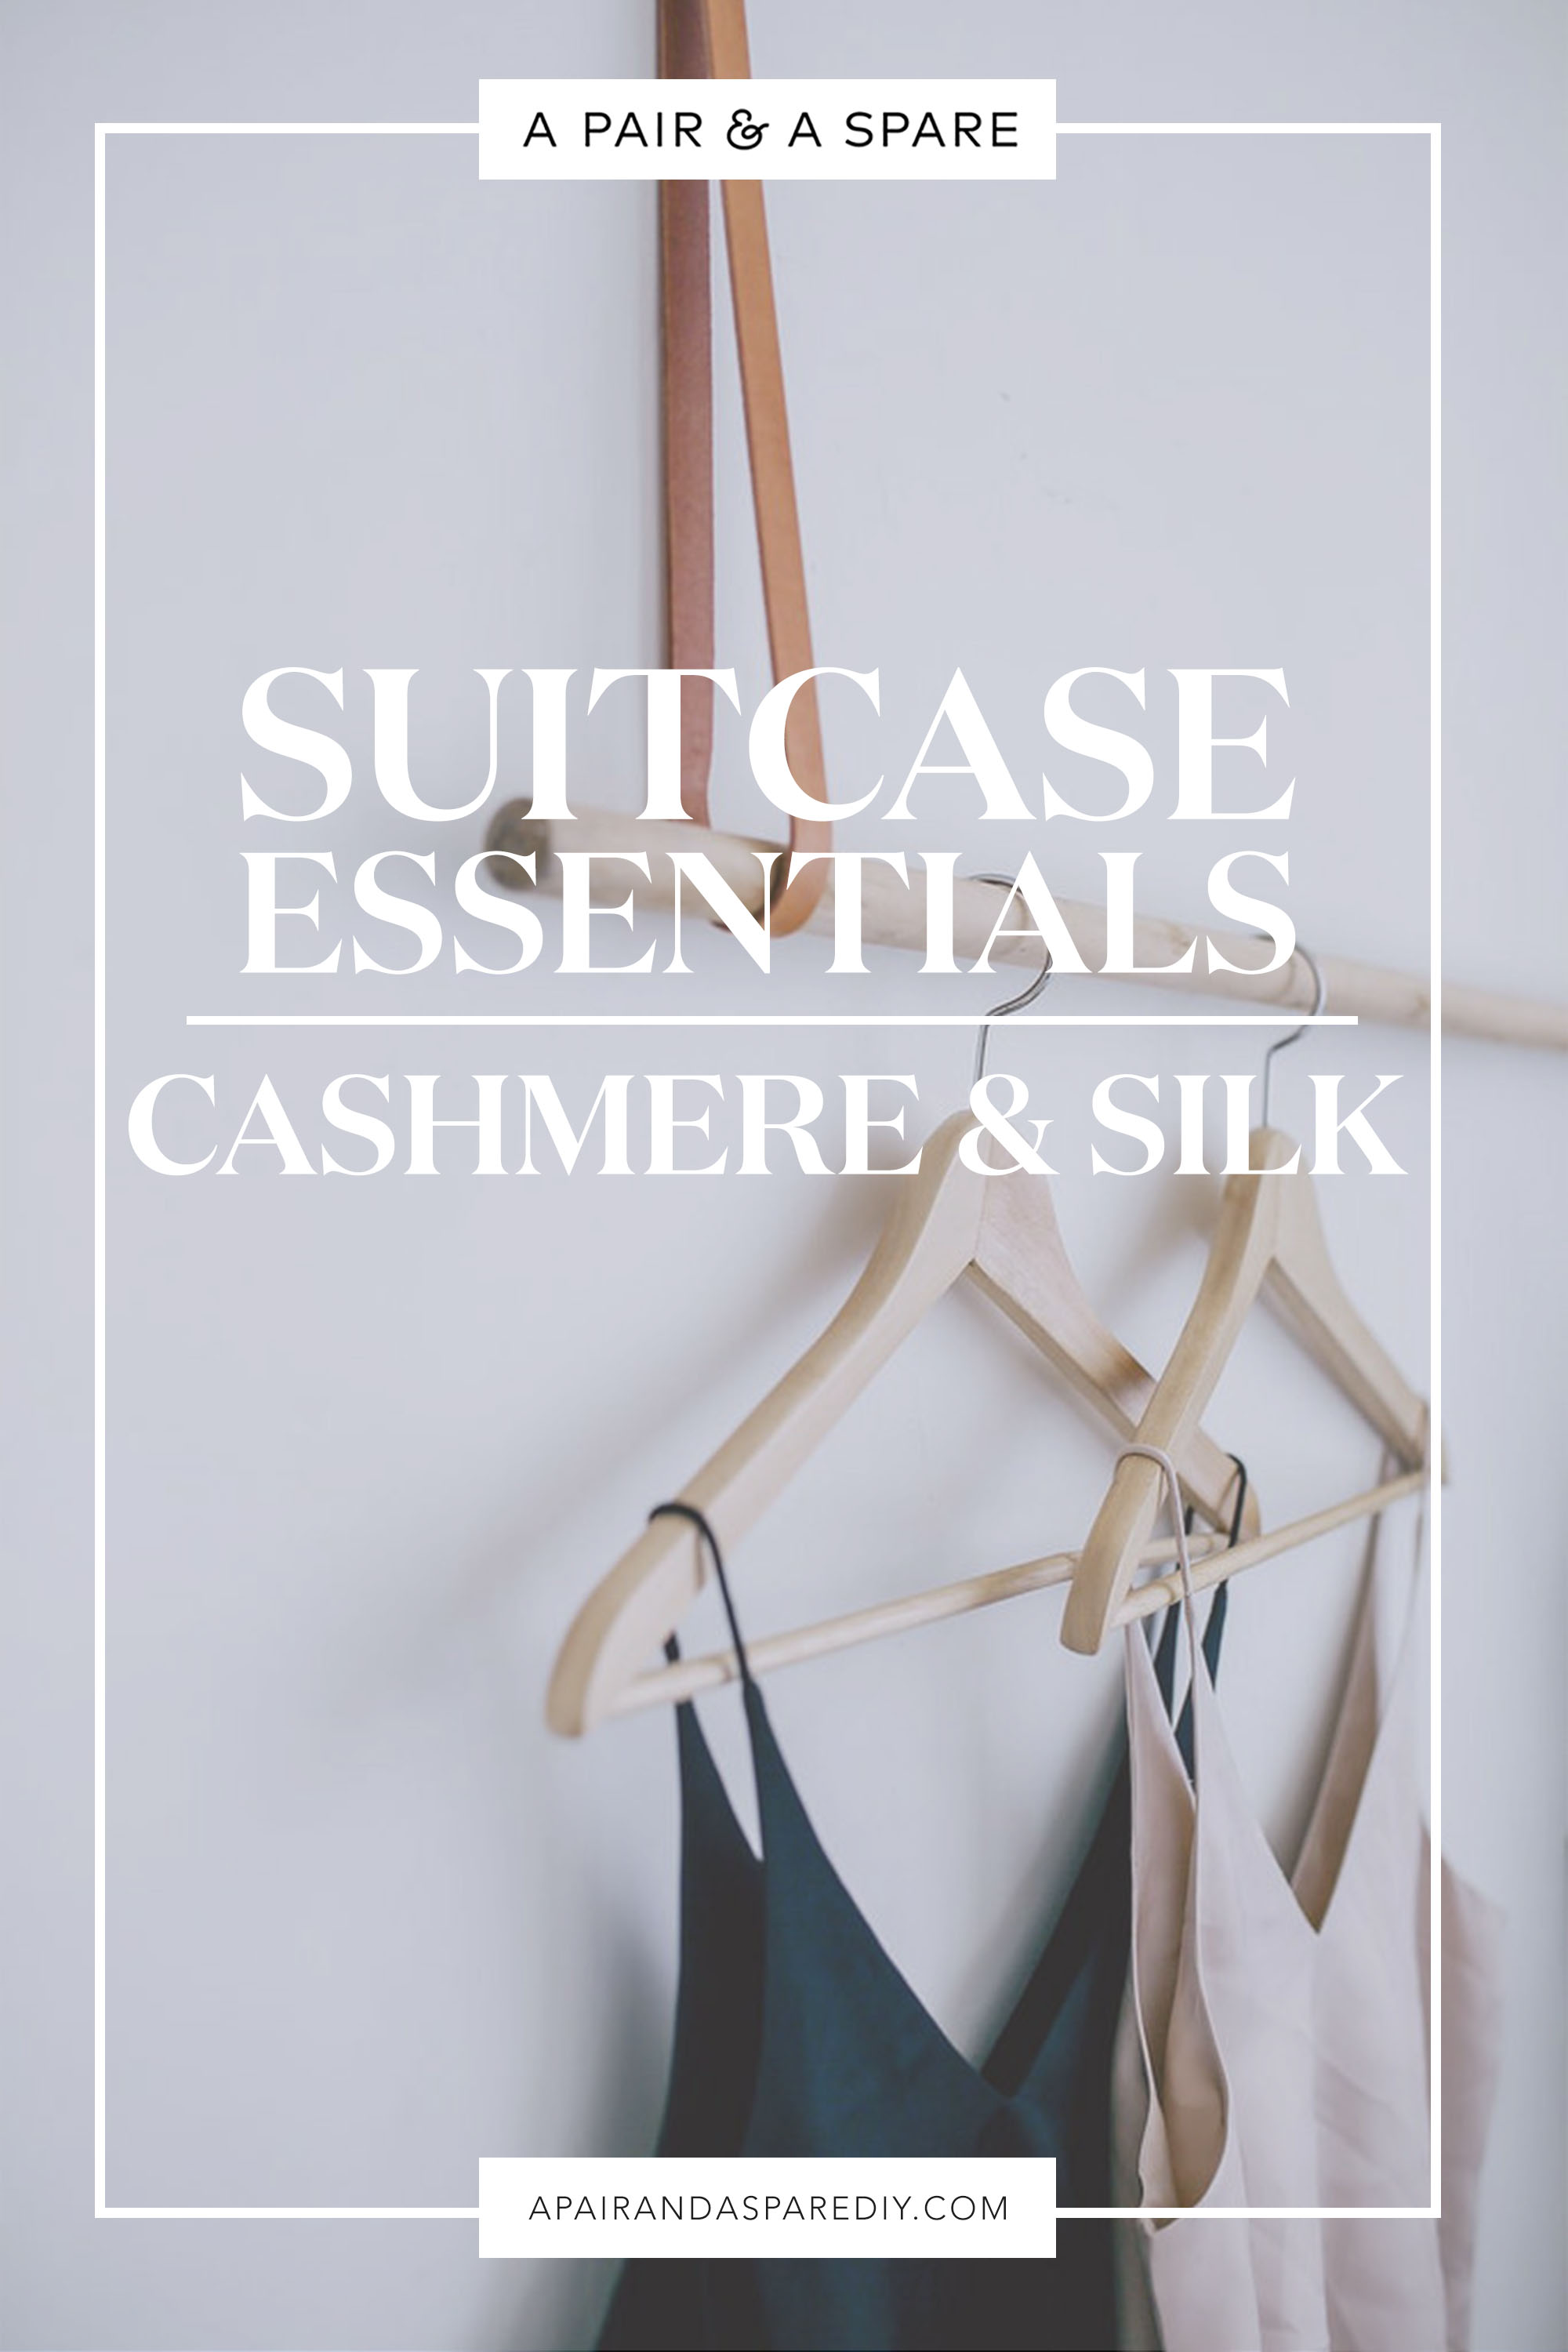 Silk and Cashmere